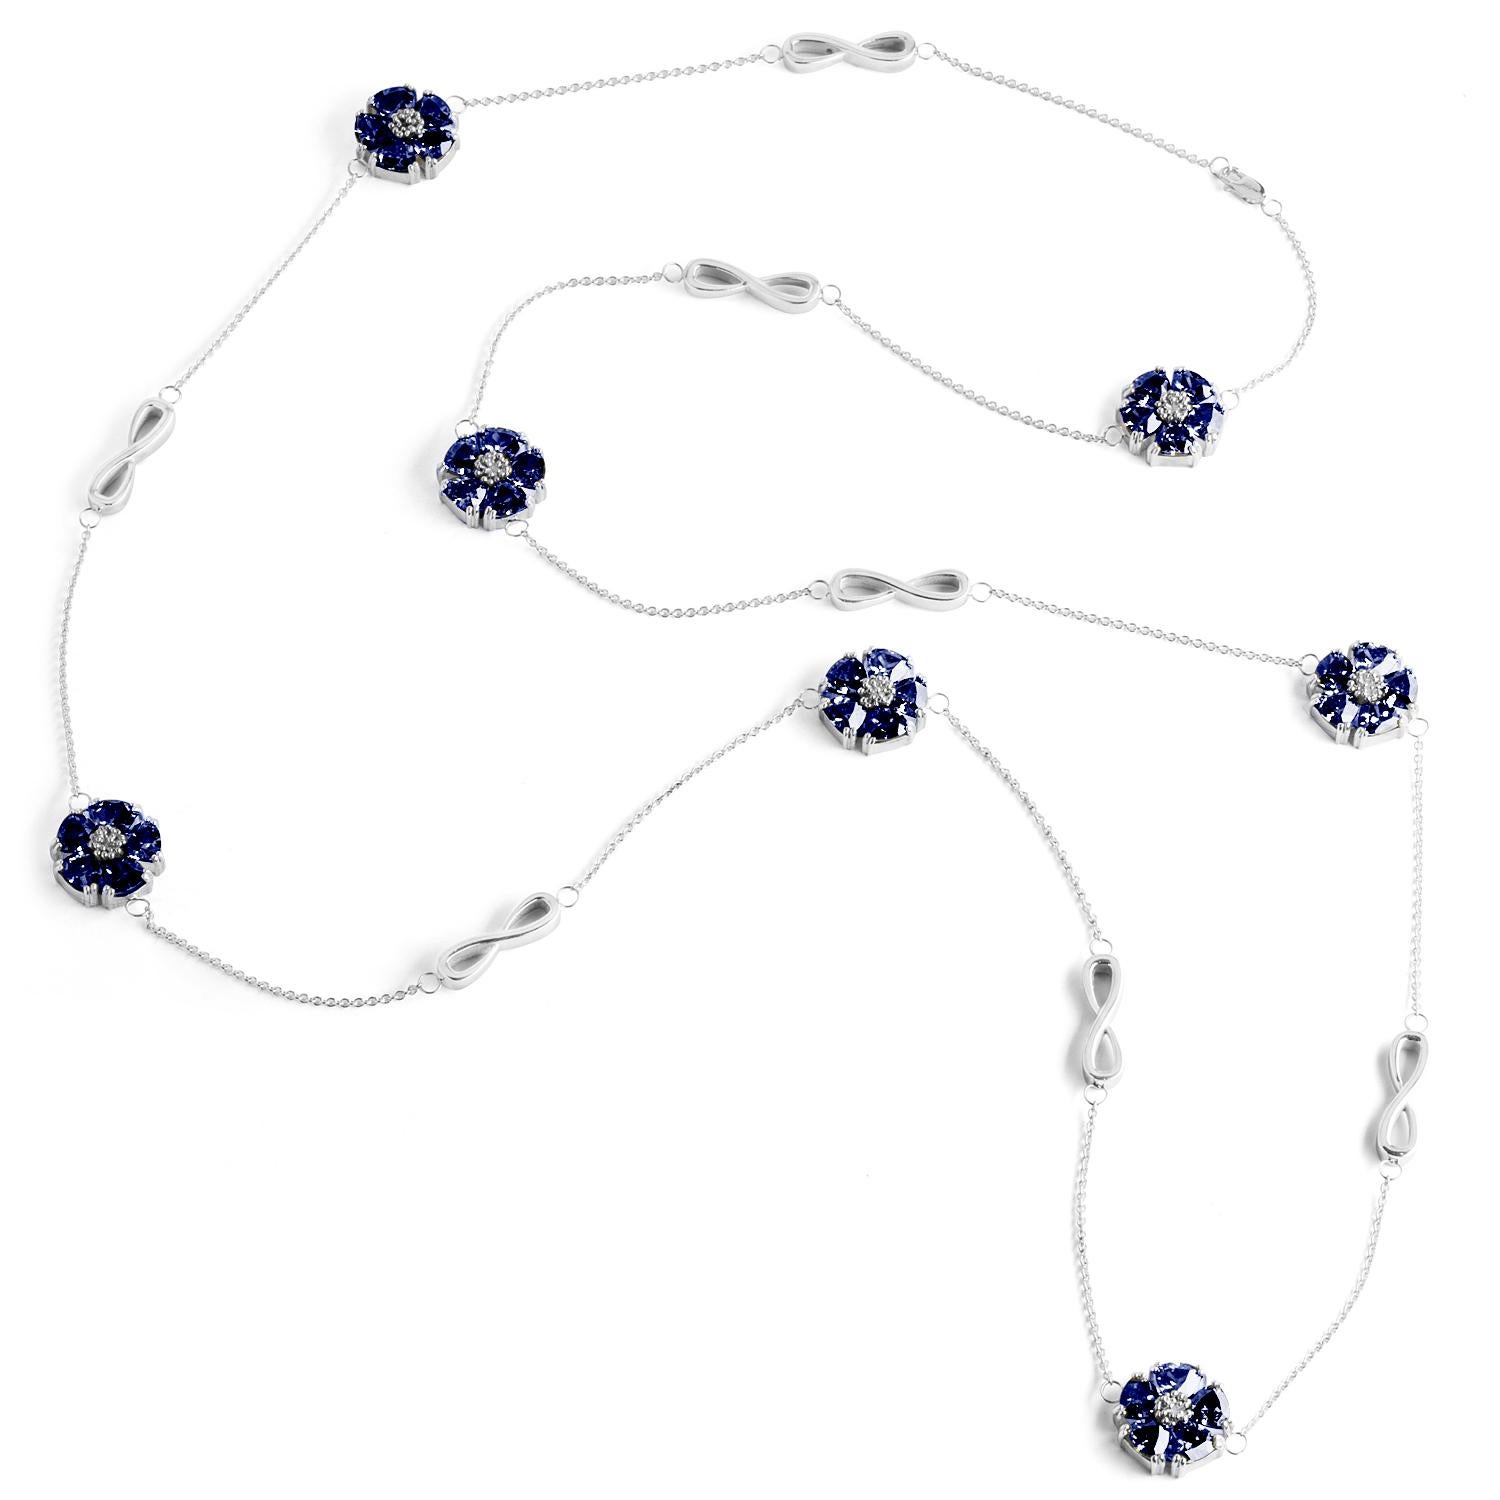 Designed in NYC

.925 Sterling Silver 15 x 7 mm Light Blue Sapphire Blossom Stone and Infinity Lariat Necklace. No matter the season, allow natural beauty to surround you wherever you go. Blossom stone and infinity lariat necklace: 

Sterling silver